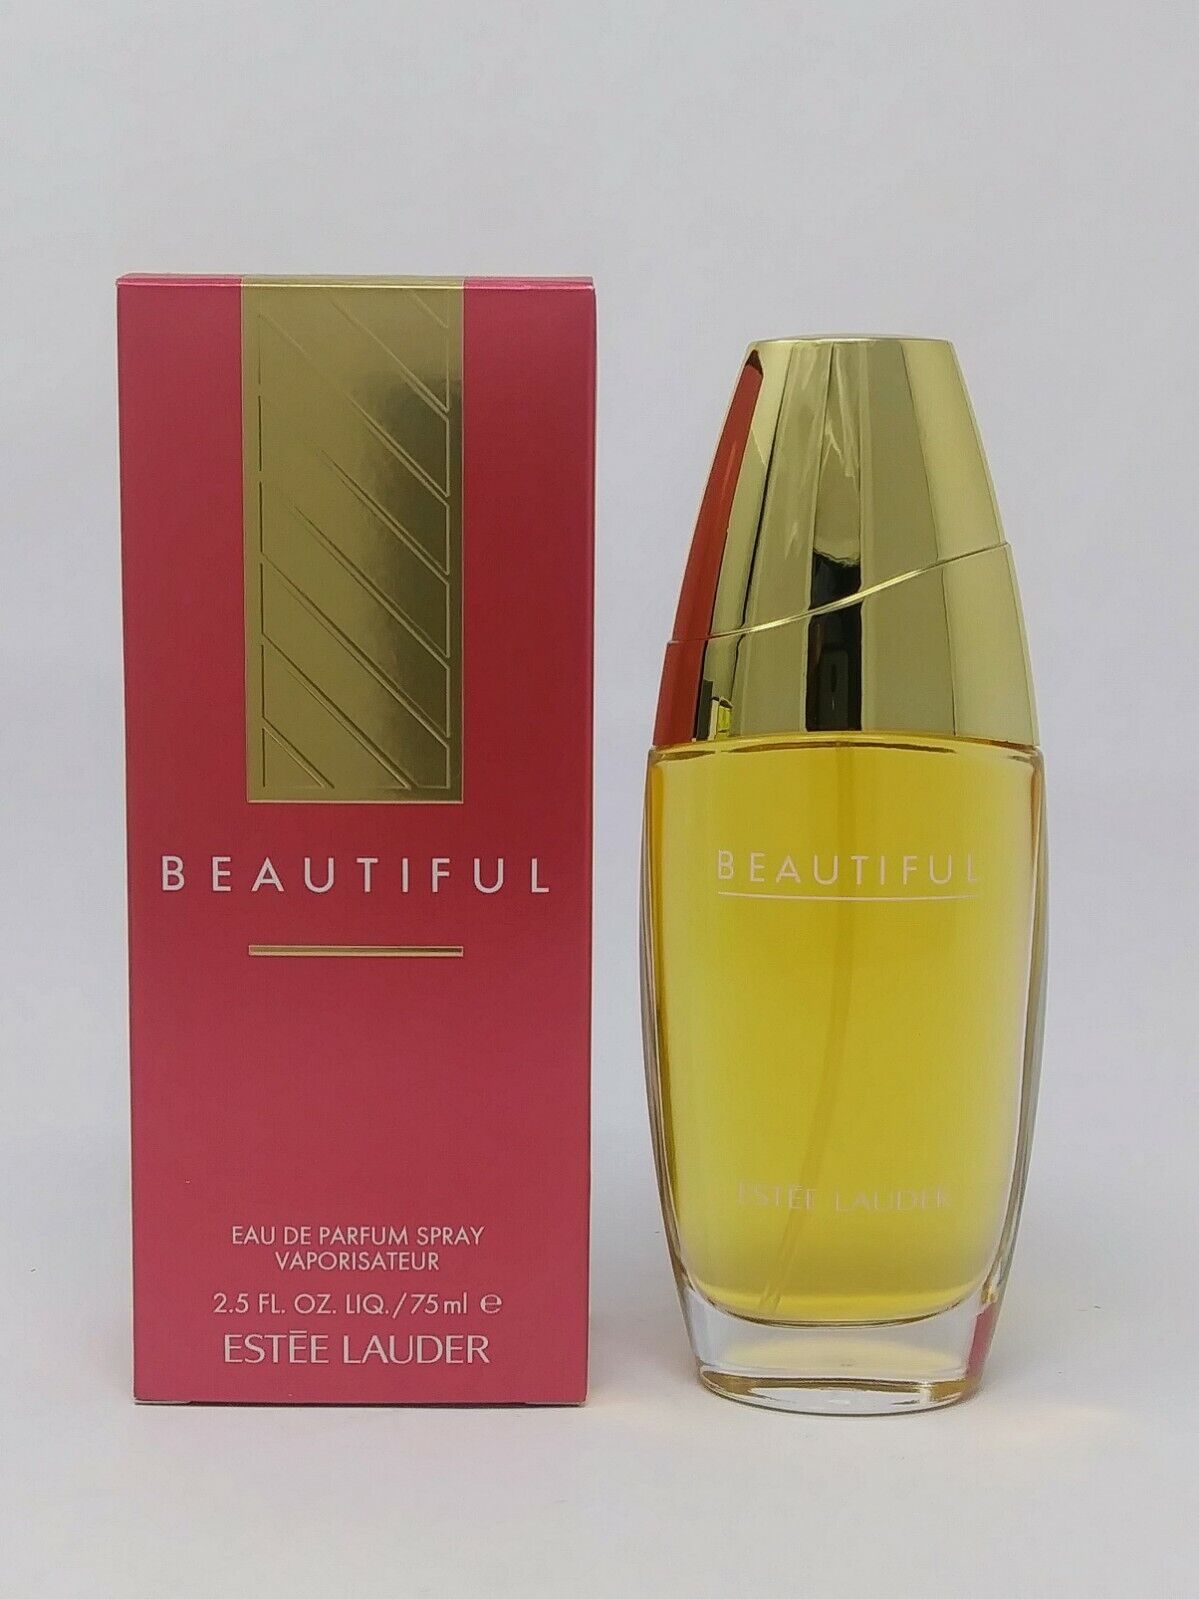 BEAUTIFUL by Estee Lauder 2.5 oz edp Perfume for women New in Box